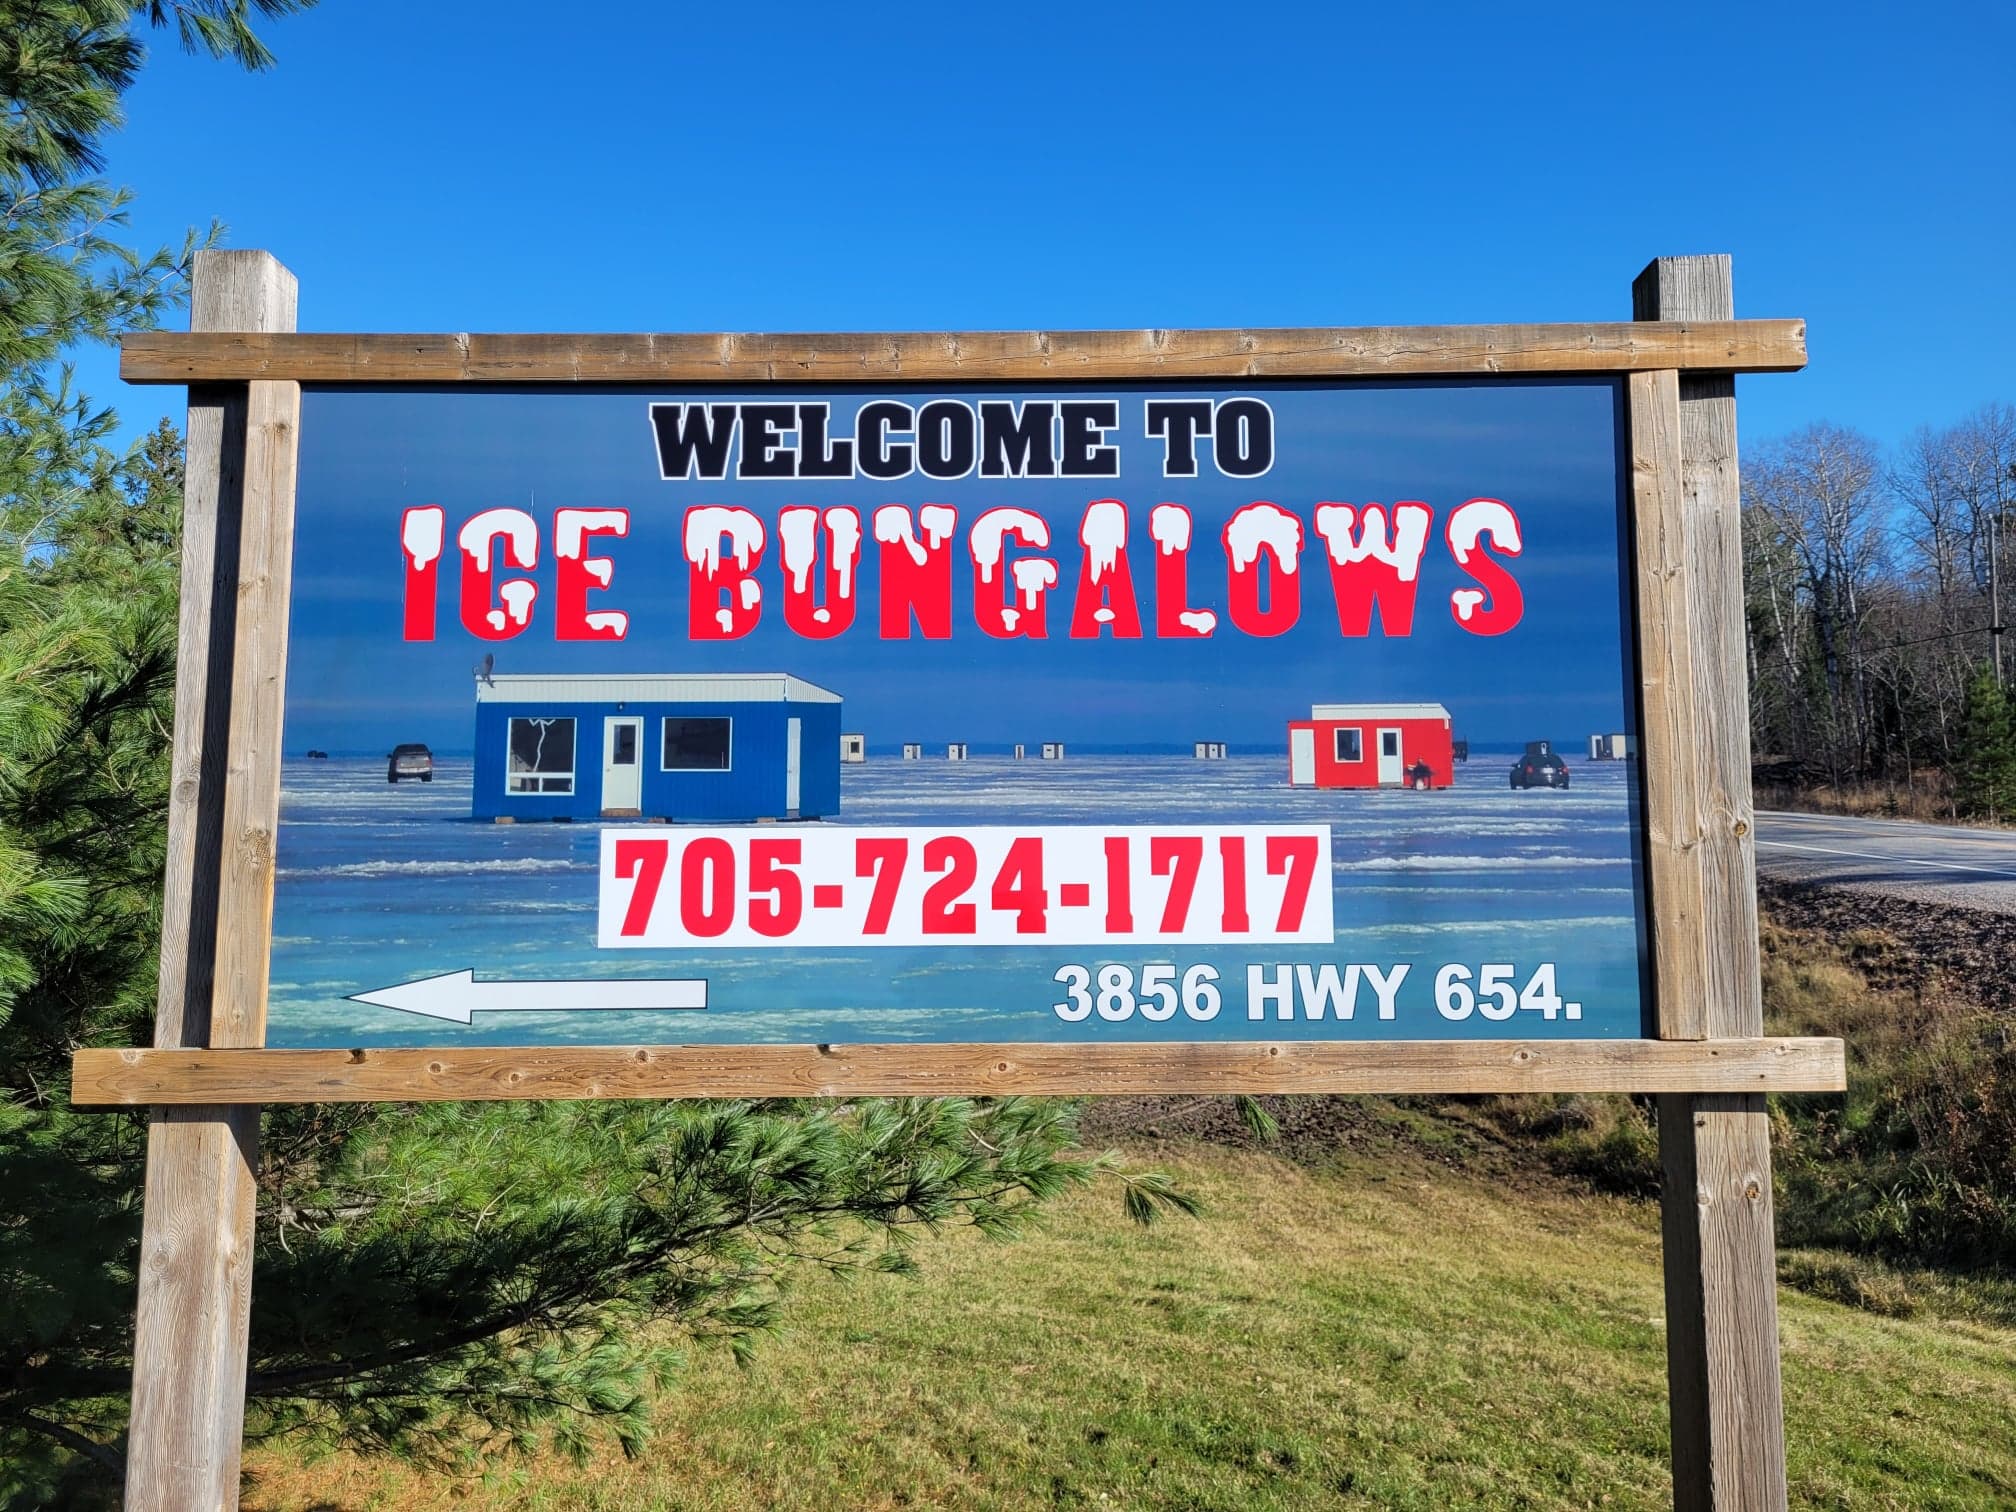 Fish Bay Marina: My First Ice Bungalow Experience on Lake